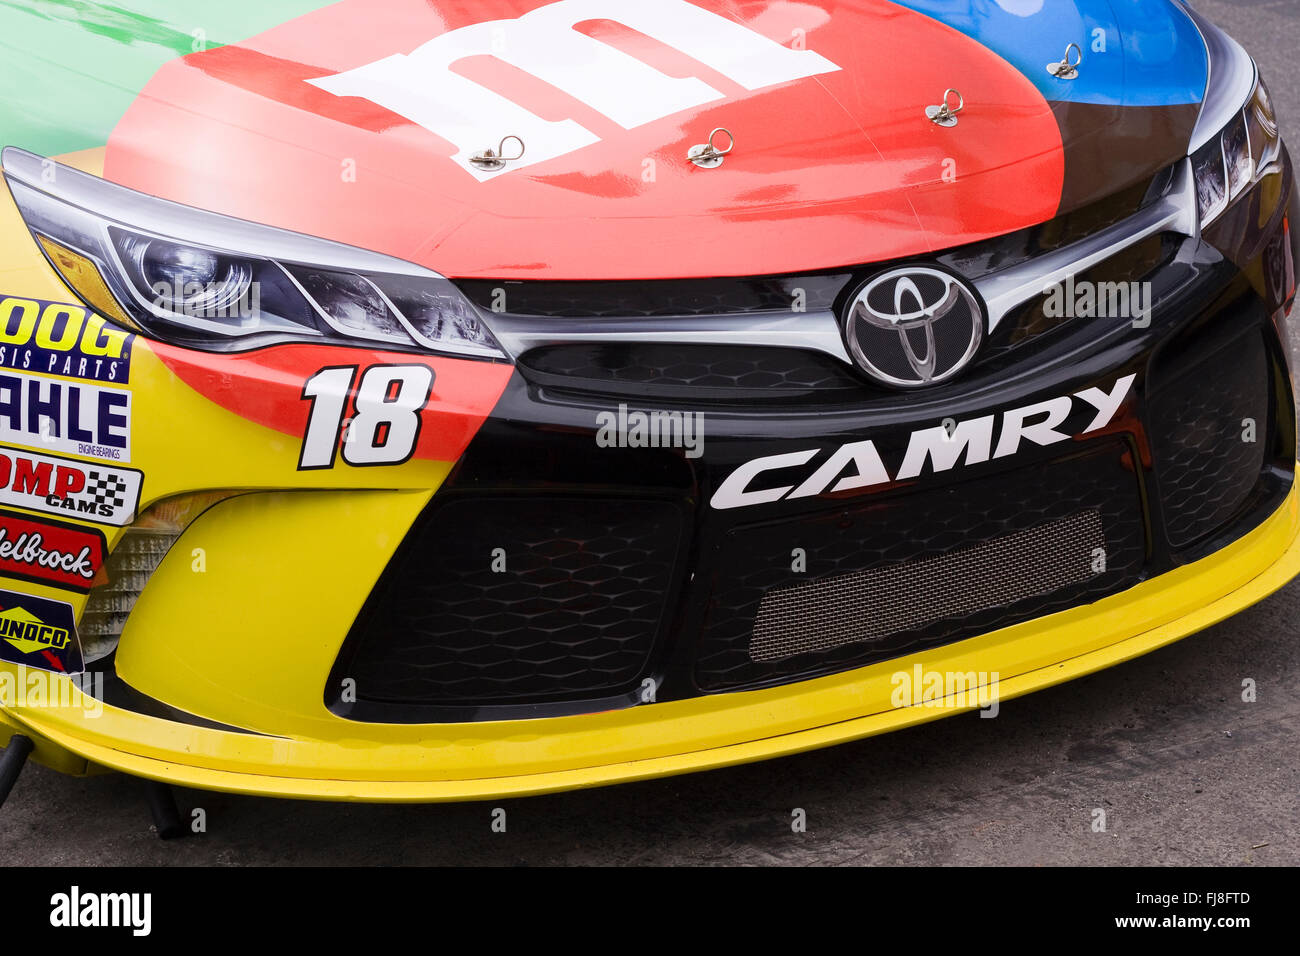 Front end grille of a NASCAR M&M Racecar #18 Driven by Kyle Busch which won the Daytona 500 Stock Car Race in 2015 Stock Photo